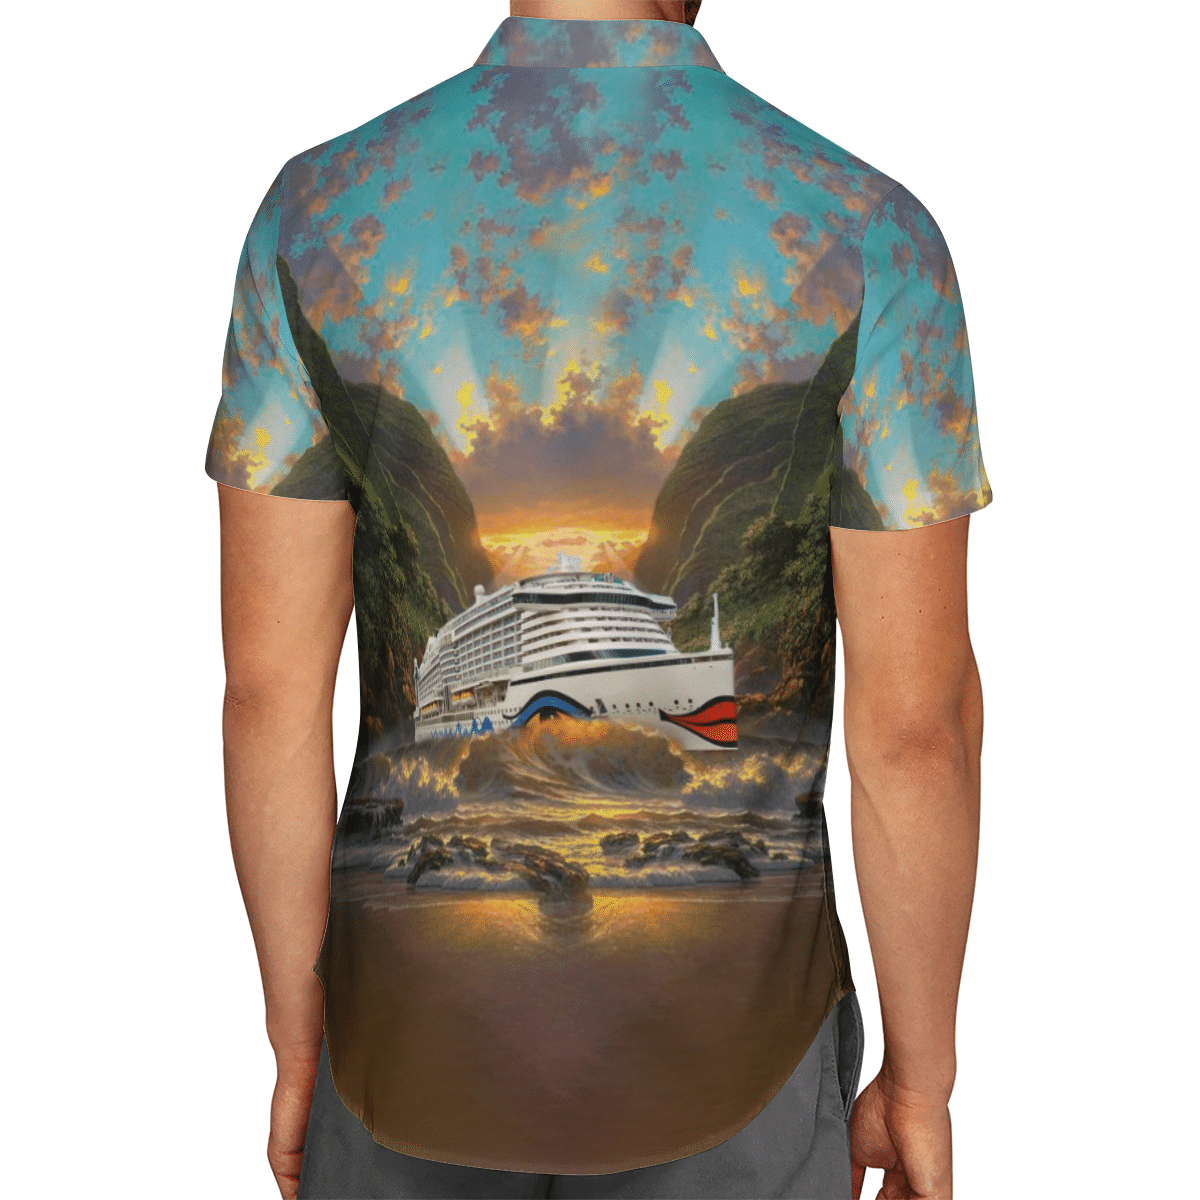 Going to the beach with a quality shirt 118